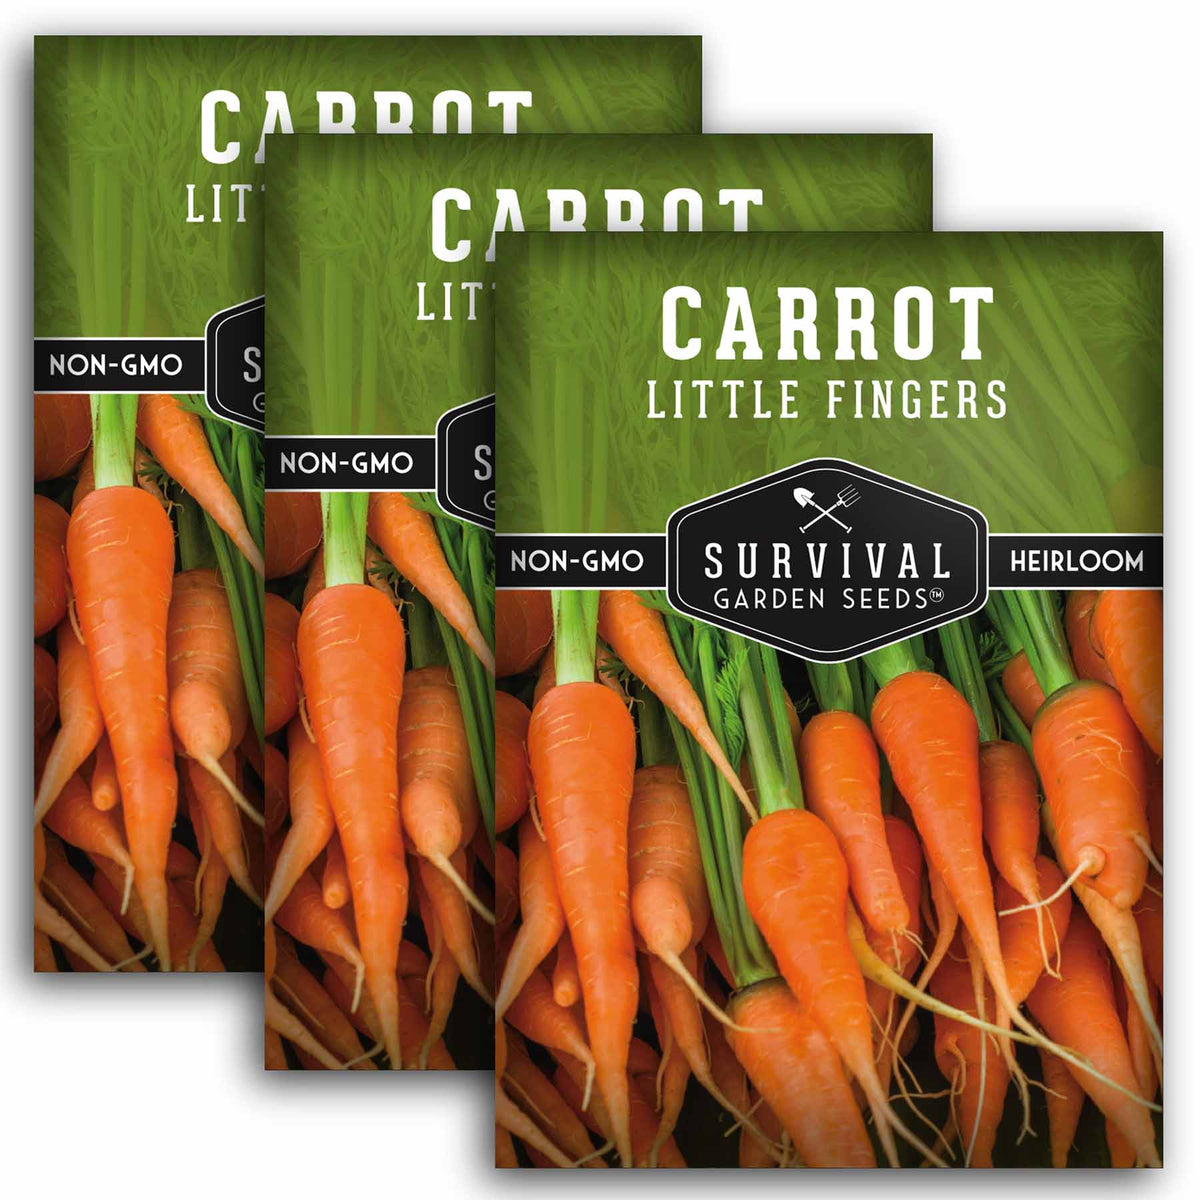 3 Packets of Little Fingers Carrot Seeds